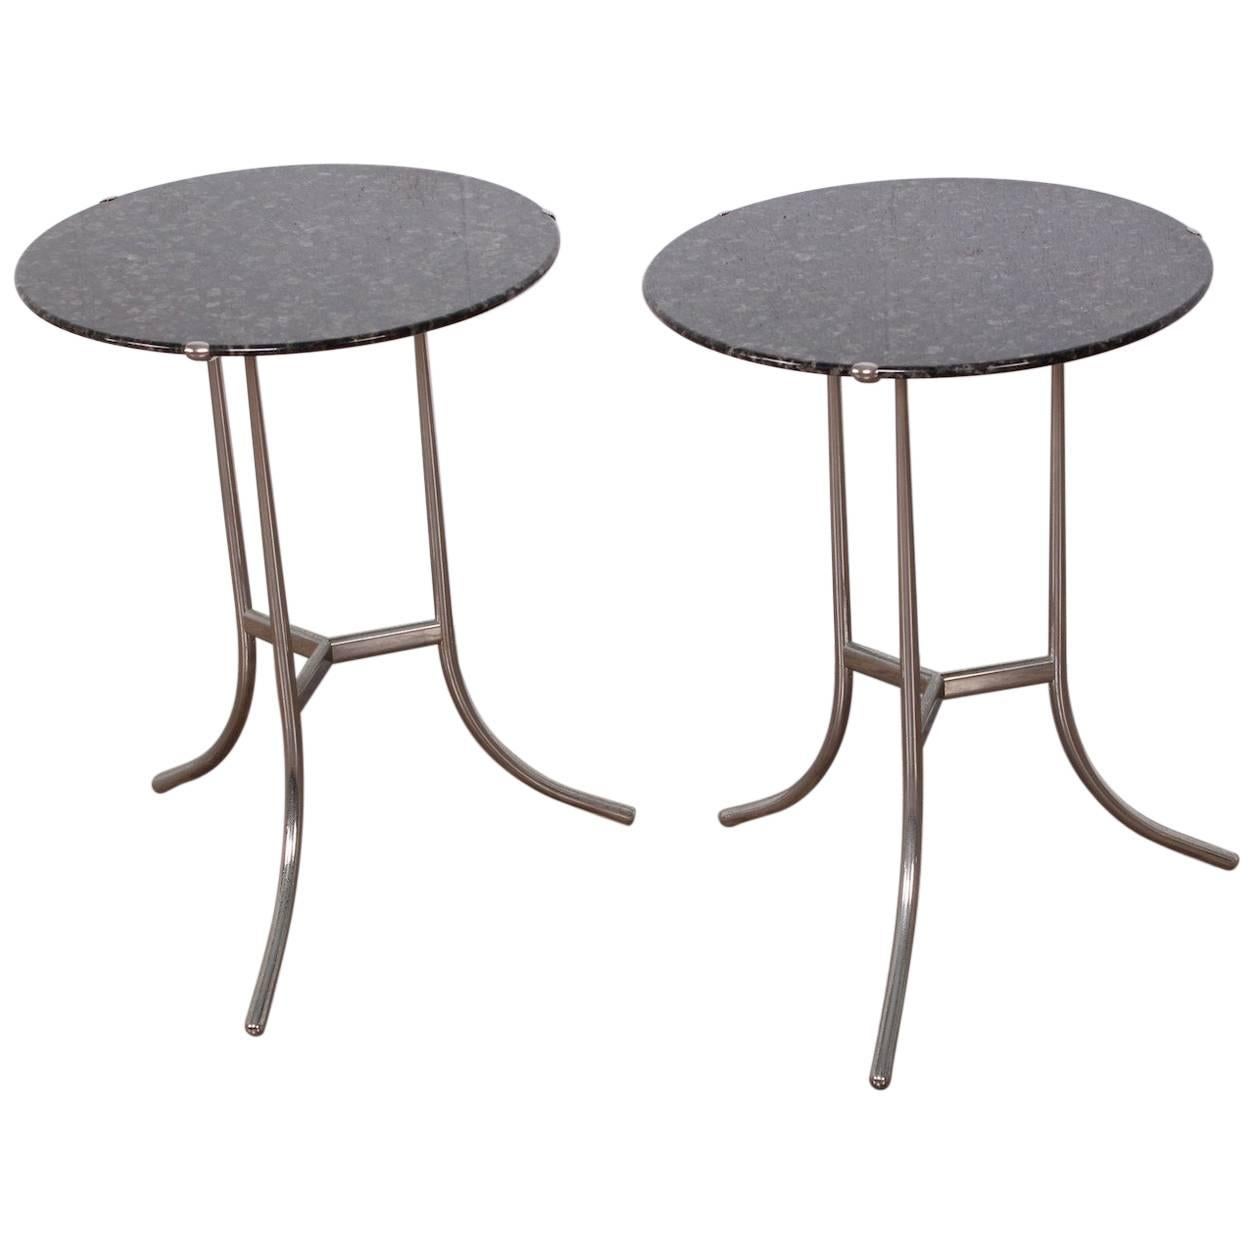 Pair of Side Tables by Cedric Hartman